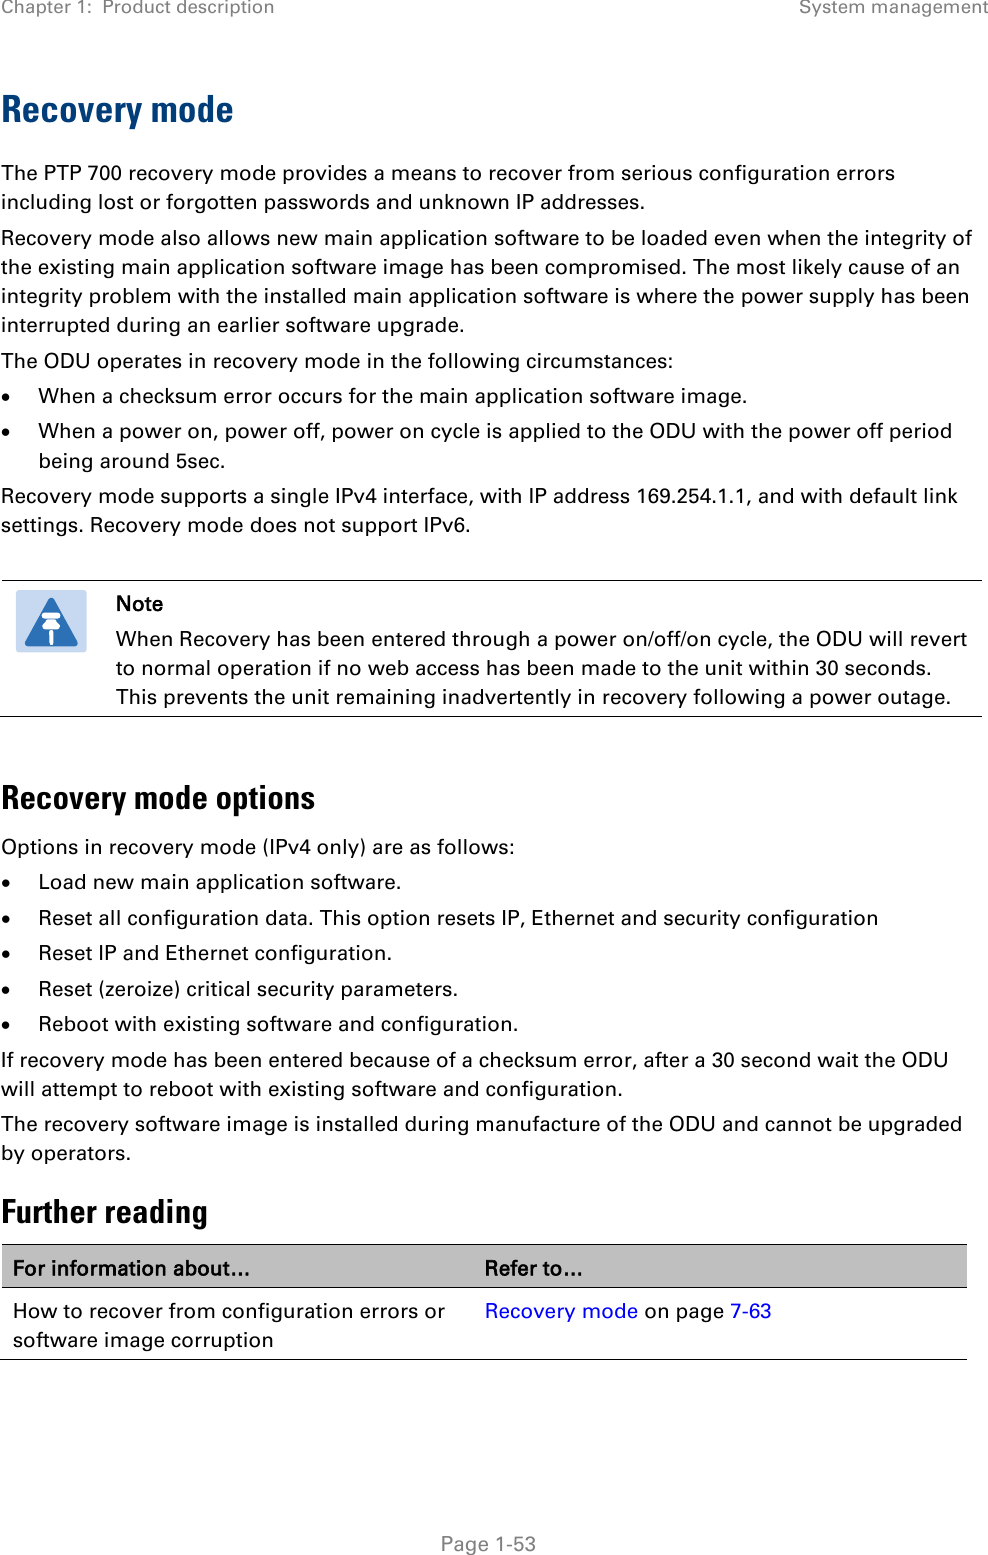 Chapter 1:  Product description System management  Recovery mode The PTP 700 recovery mode provides a means to recover from serious configuration errors including lost or forgotten passwords and unknown IP addresses. Recovery mode also allows new main application software to be loaded even when the integrity of the existing main application software image has been compromised. The most likely cause of an integrity problem with the installed main application software is where the power supply has been interrupted during an earlier software upgrade. The ODU operates in recovery mode in the following circumstances: • When a checksum error occurs for the main application software image. • When a power on, power off, power on cycle is applied to the ODU with the power off period being around 5sec. Recovery mode supports a single IPv4 interface, with IP address 169.254.1.1, and with default link settings. Recovery mode does not support IPv6.   Note When Recovery has been entered through a power on/off/on cycle, the ODU will revert to normal operation if no web access has been made to the unit within 30 seconds. This prevents the unit remaining inadvertently in recovery following a power outage.  Recovery mode options Options in recovery mode (IPv4 only) are as follows: • Load new main application software. • Reset all configuration data. This option resets IP, Ethernet and security configuration • Reset IP and Ethernet configuration. • Reset (zeroize) critical security parameters. • Reboot with existing software and configuration. If recovery mode has been entered because of a checksum error, after a 30 second wait the ODU will attempt to reboot with existing software and configuration. The recovery software image is installed during manufacture of the ODU and cannot be upgraded by operators. Further reading For information about… Refer to… How to recover from configuration errors or software image corruption Recovery mode on page 7-63   Page 1-53 